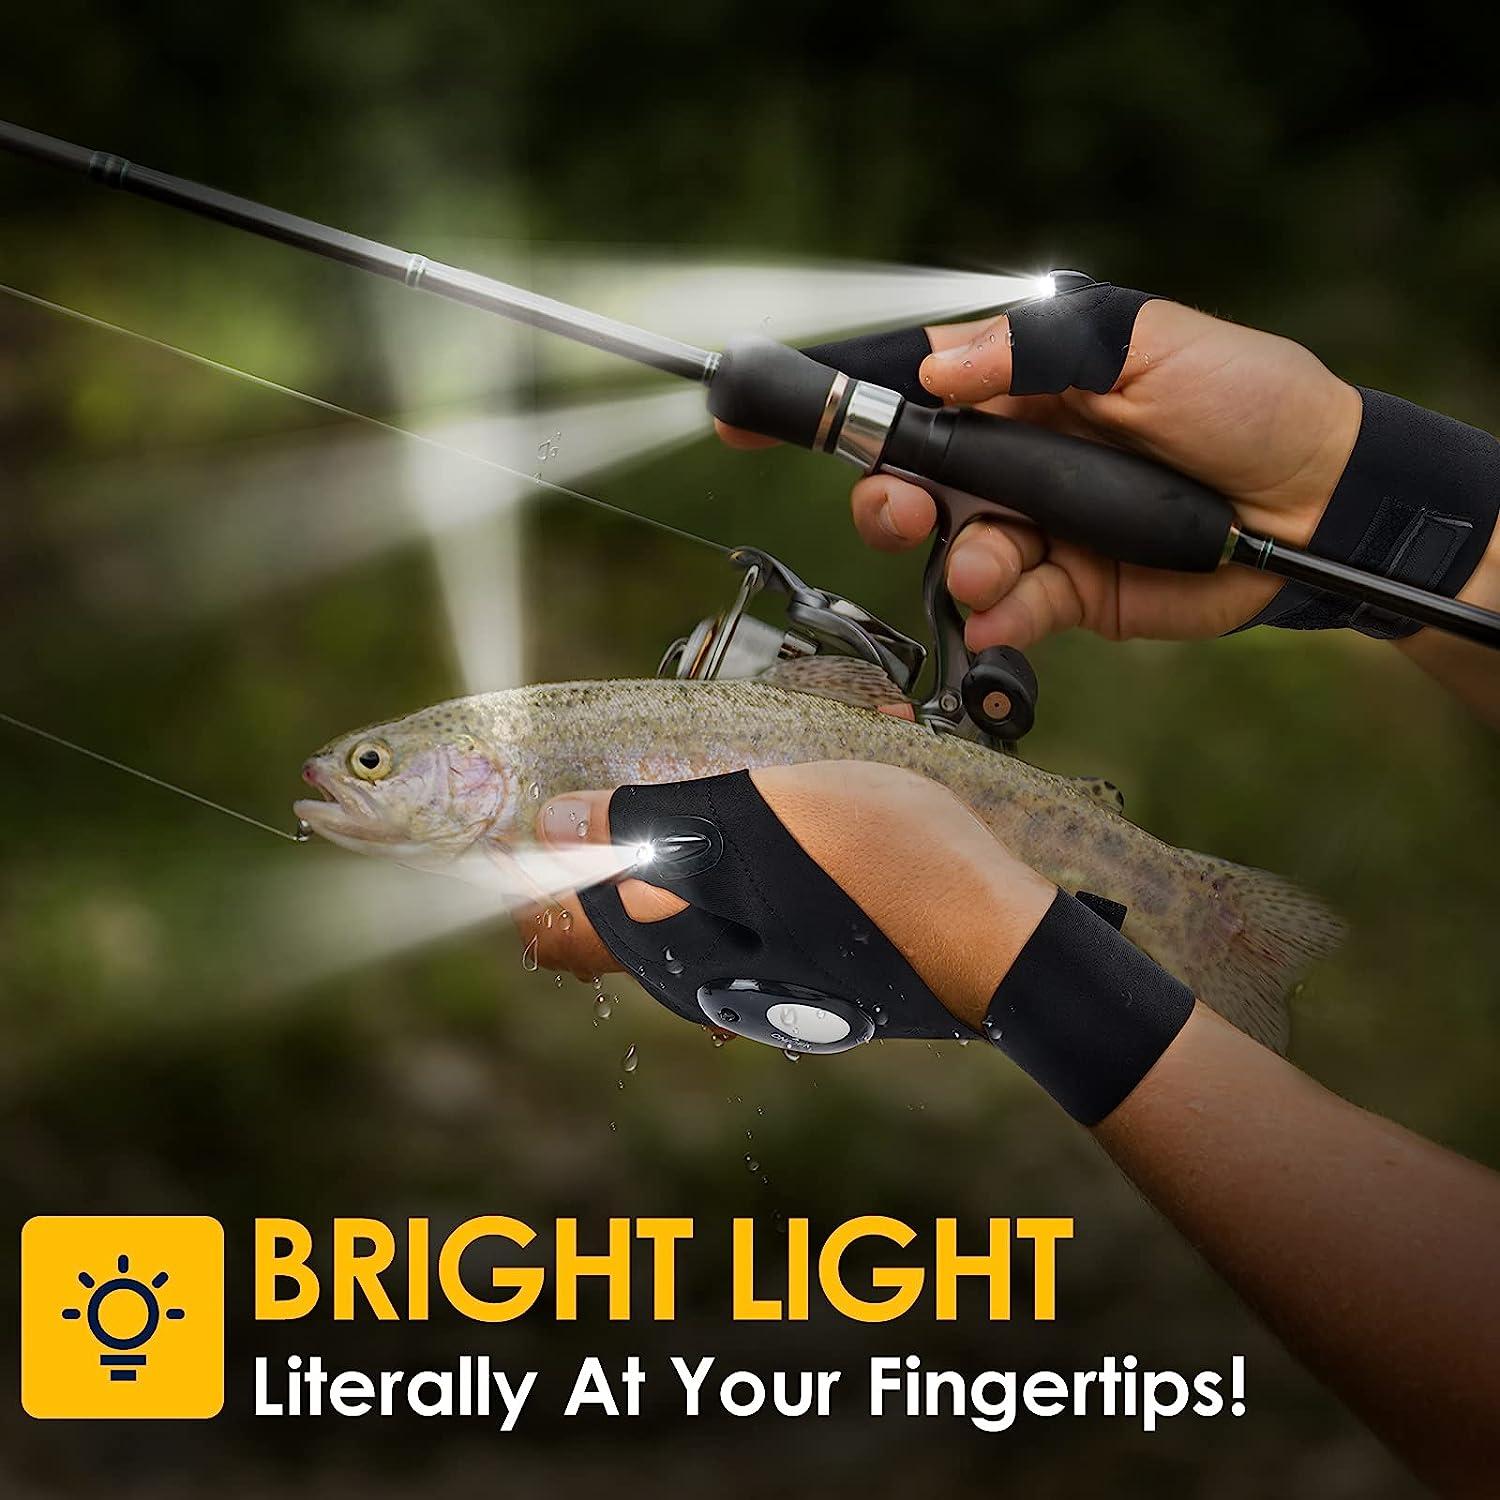 LED Flashlight Gloves Gifts for Men - Dad Gifts for Fathers Day